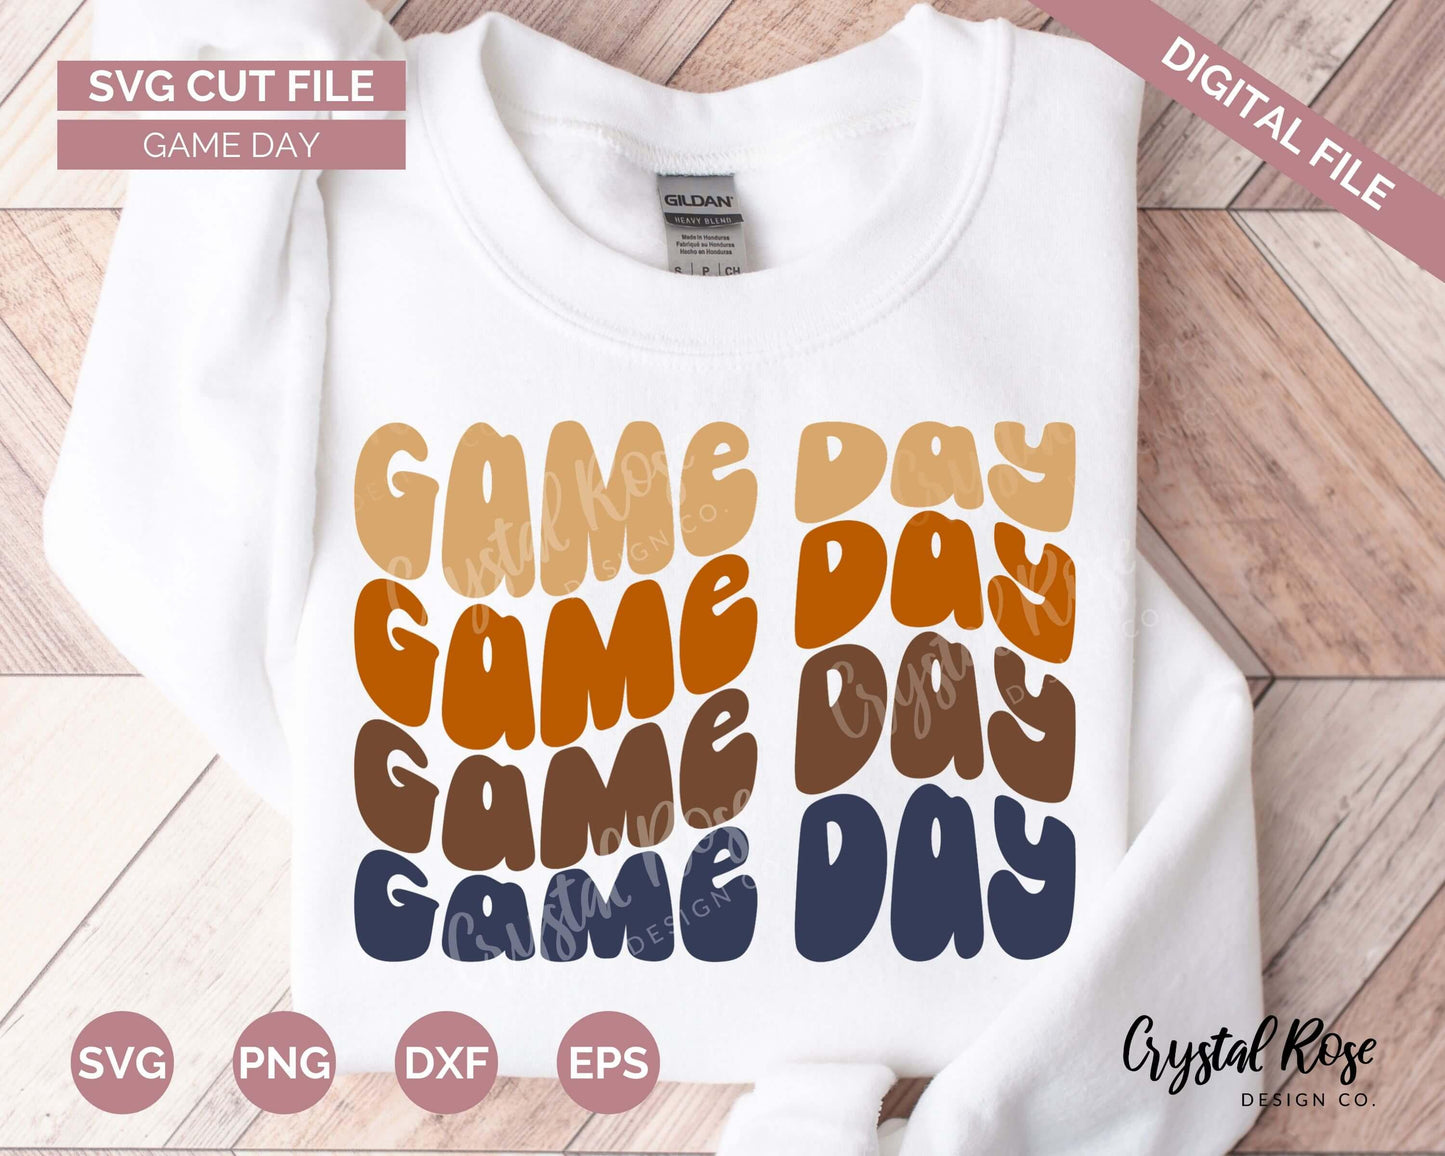 Game Day SVG, Fall SVG, Digital Download, Cricut, Silhouette, Glowforge (includes svg/png/dxf/eps) - Crystal Rose Design Co.